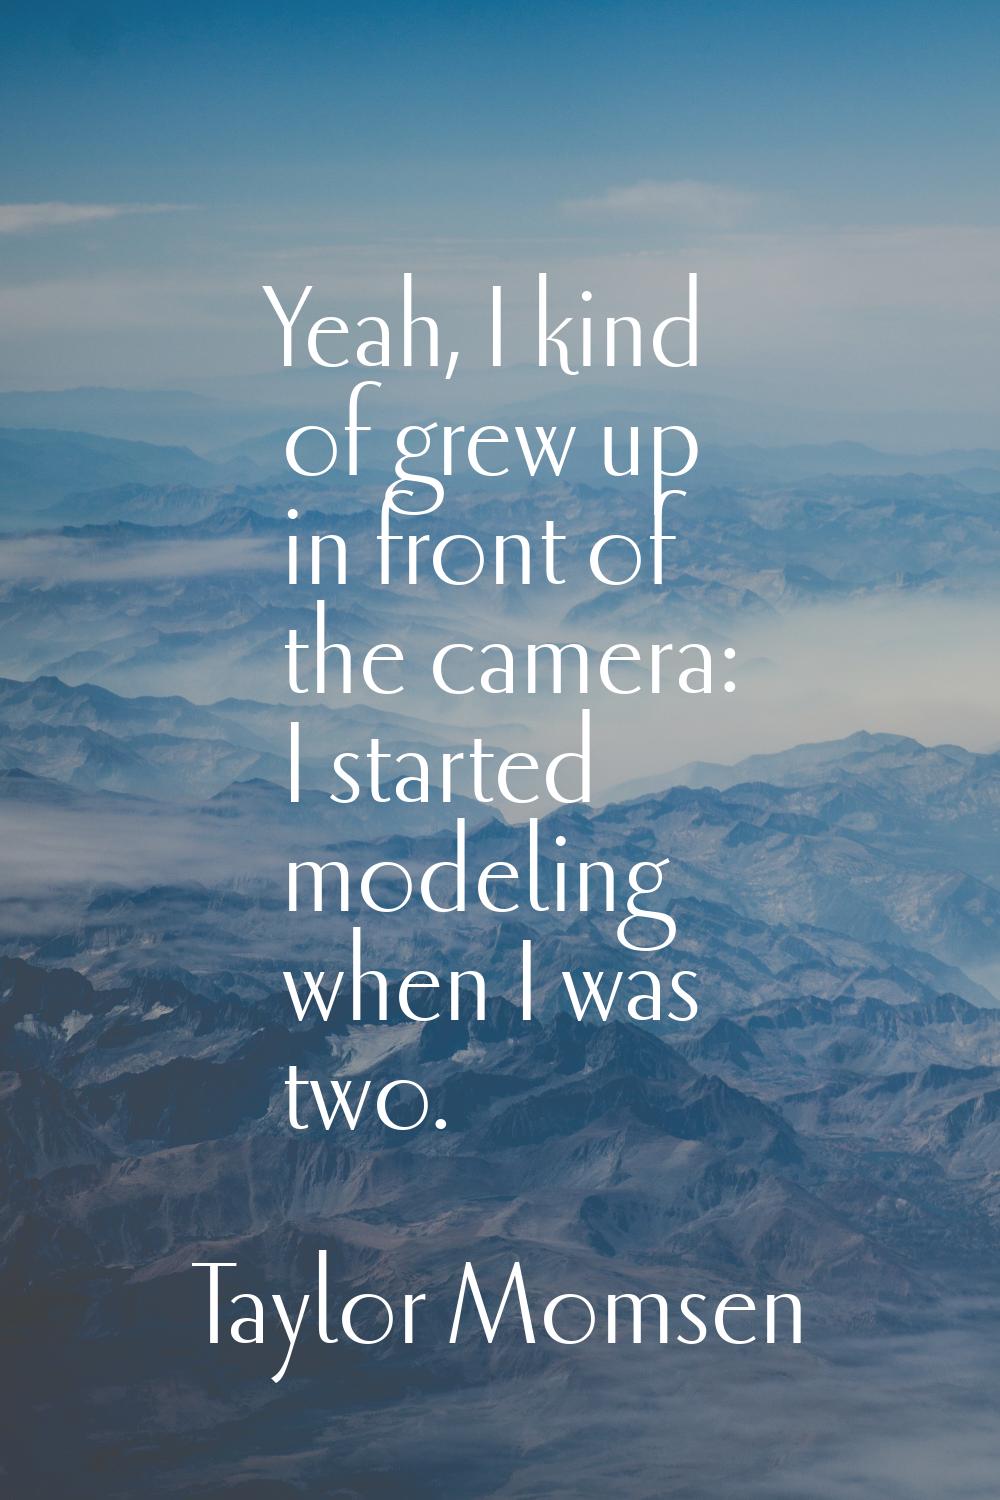 Yeah, I kind of grew up in front of the camera: I started modeling when I was two.